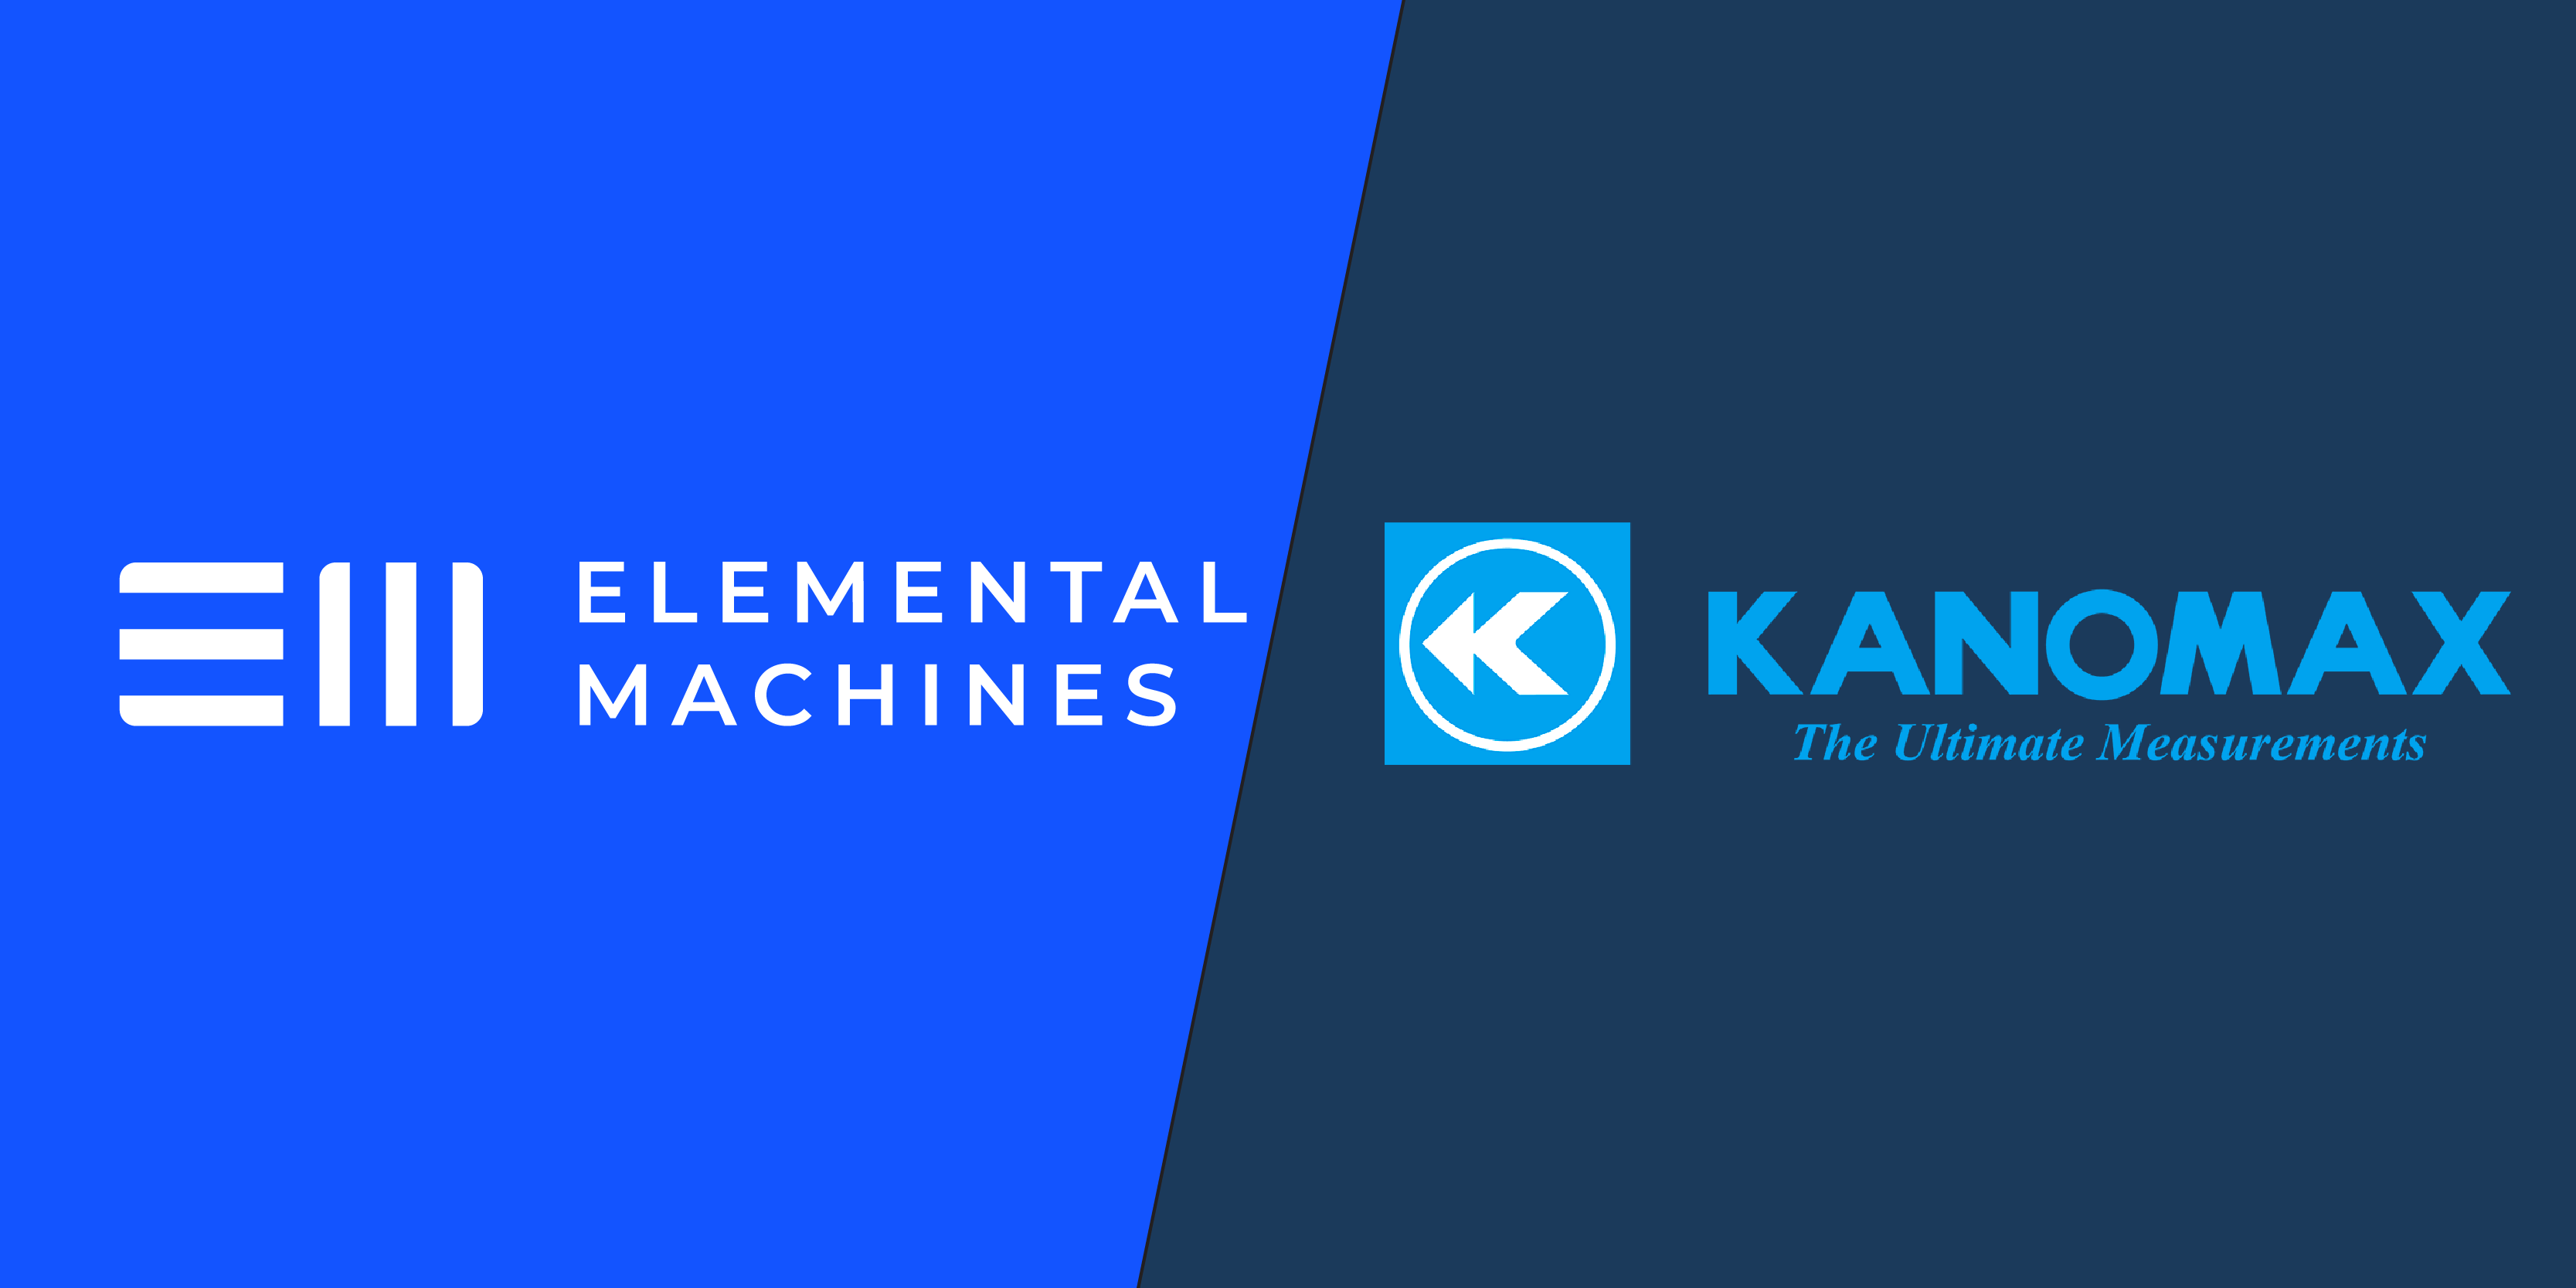 Elemental Machines and Kanomax USA join forces on integrated digital solution for cleanrooms